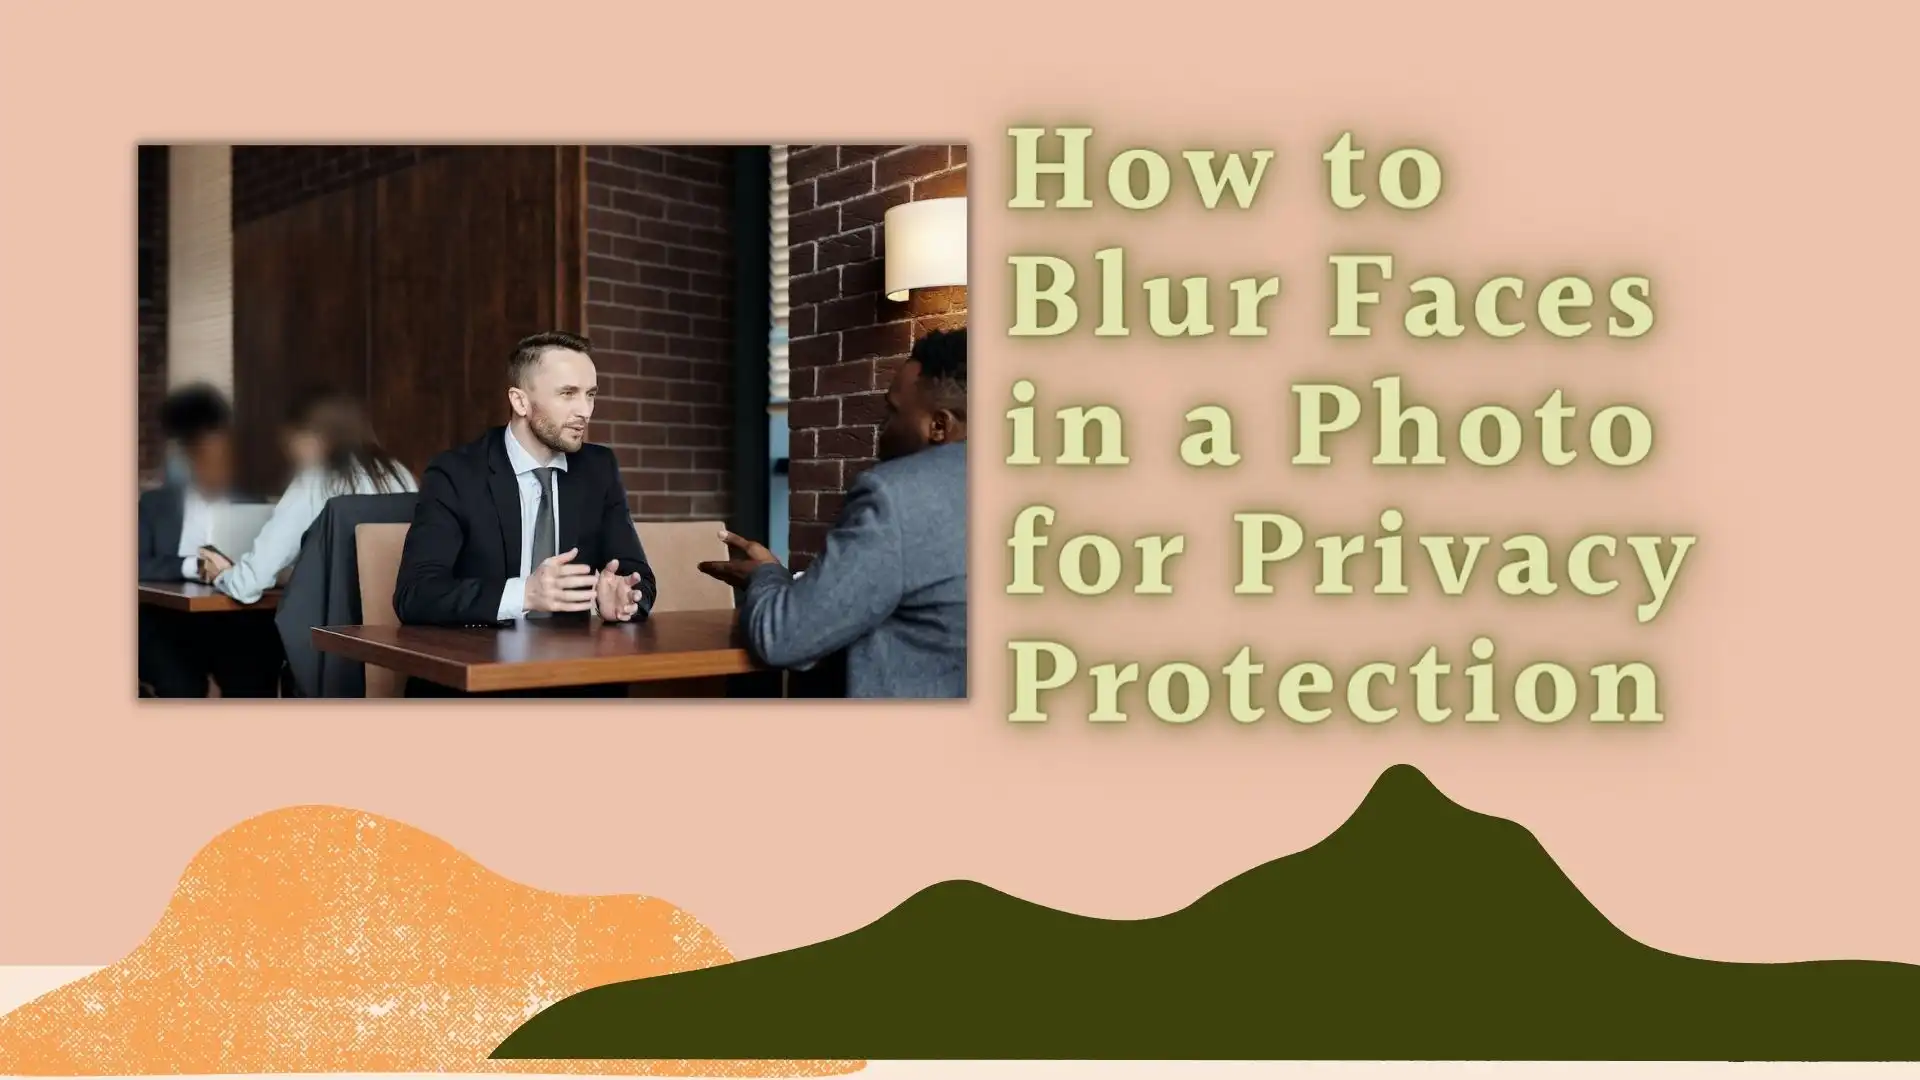 How to Blur Faces in a Photo for Privacy Protection